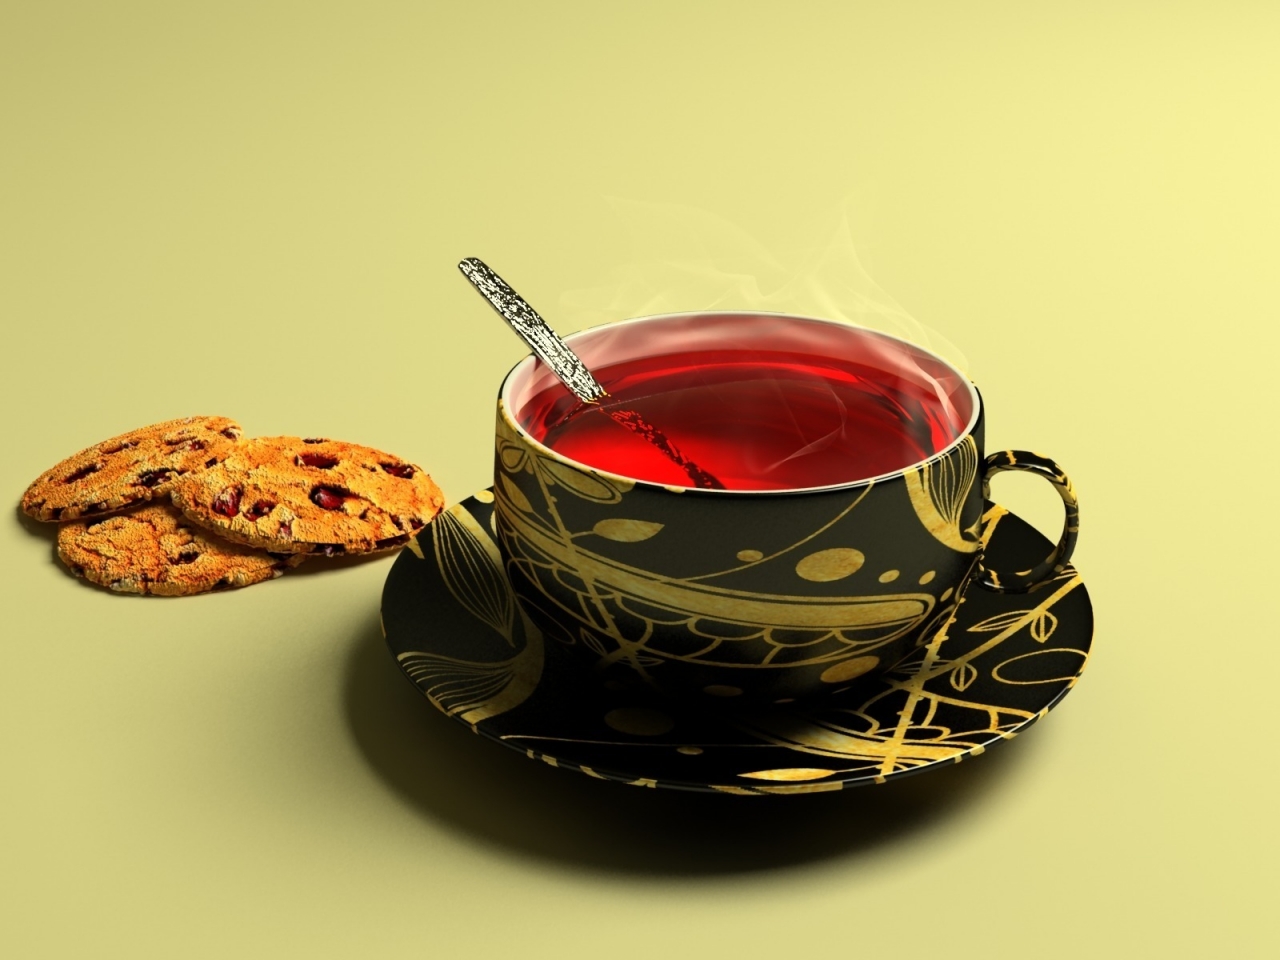 Cup of Tea for 1280 x 960 resolution